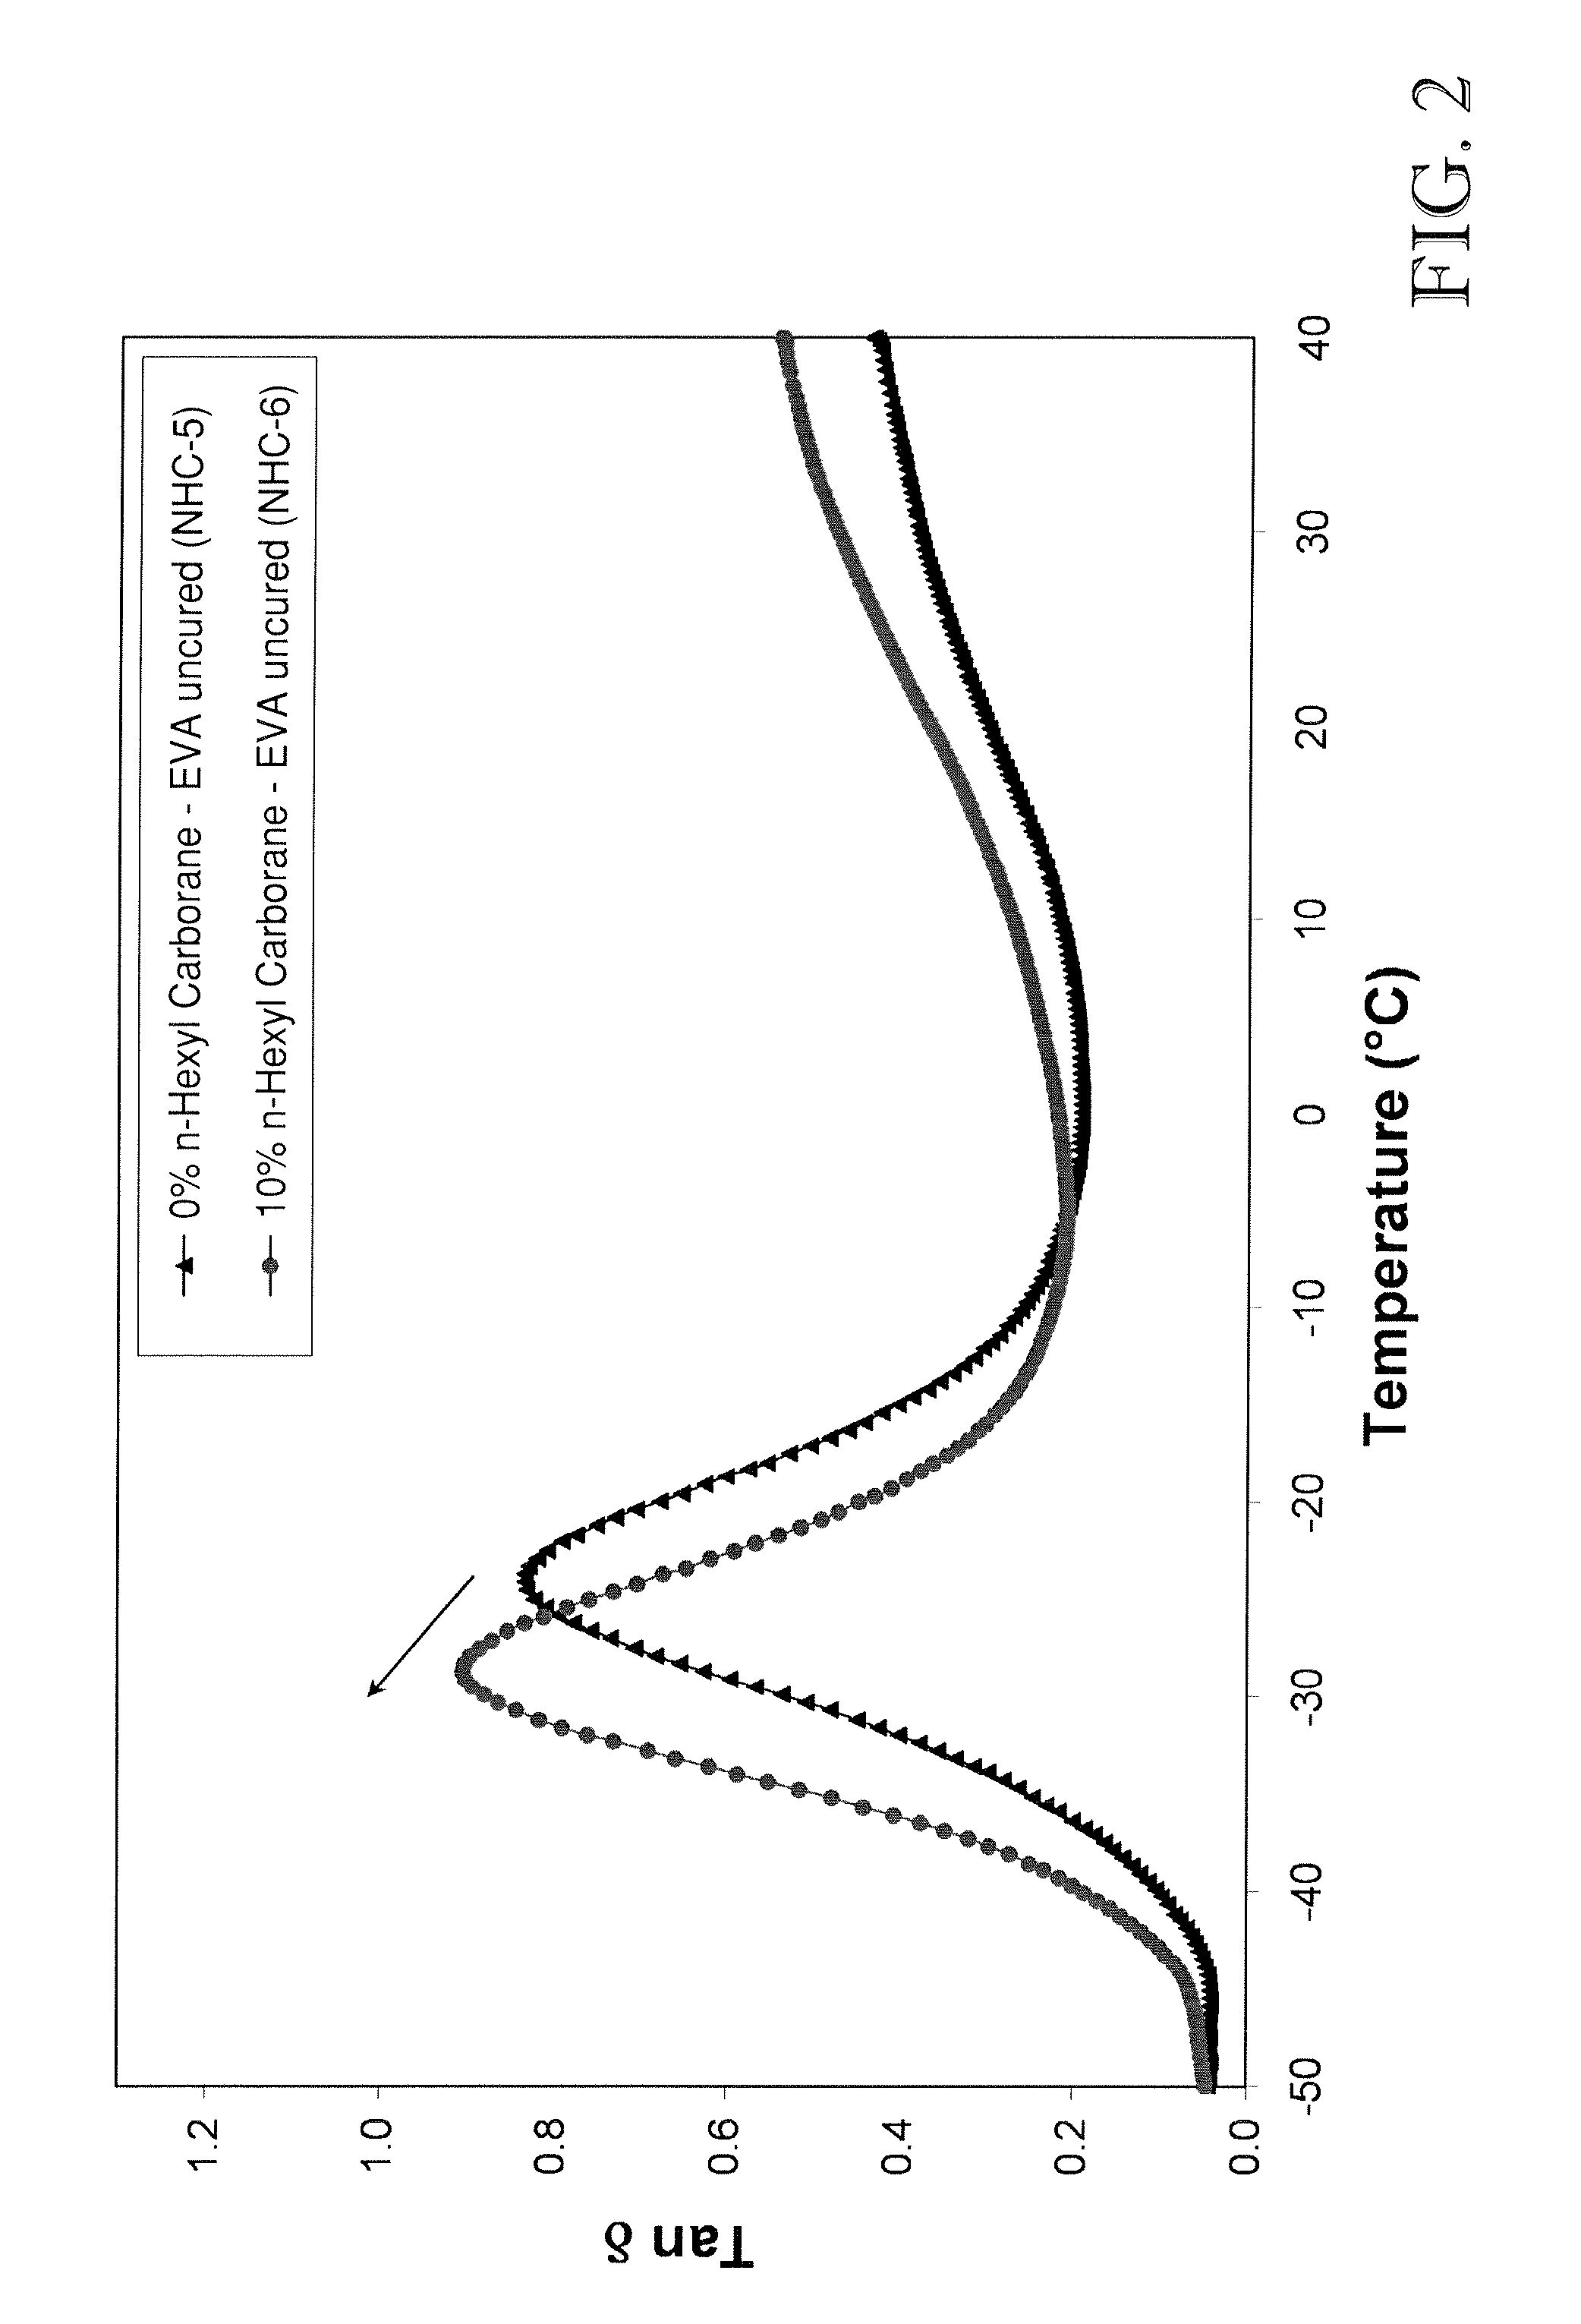 Compositions containing borane or carborane cage compounds and related applications